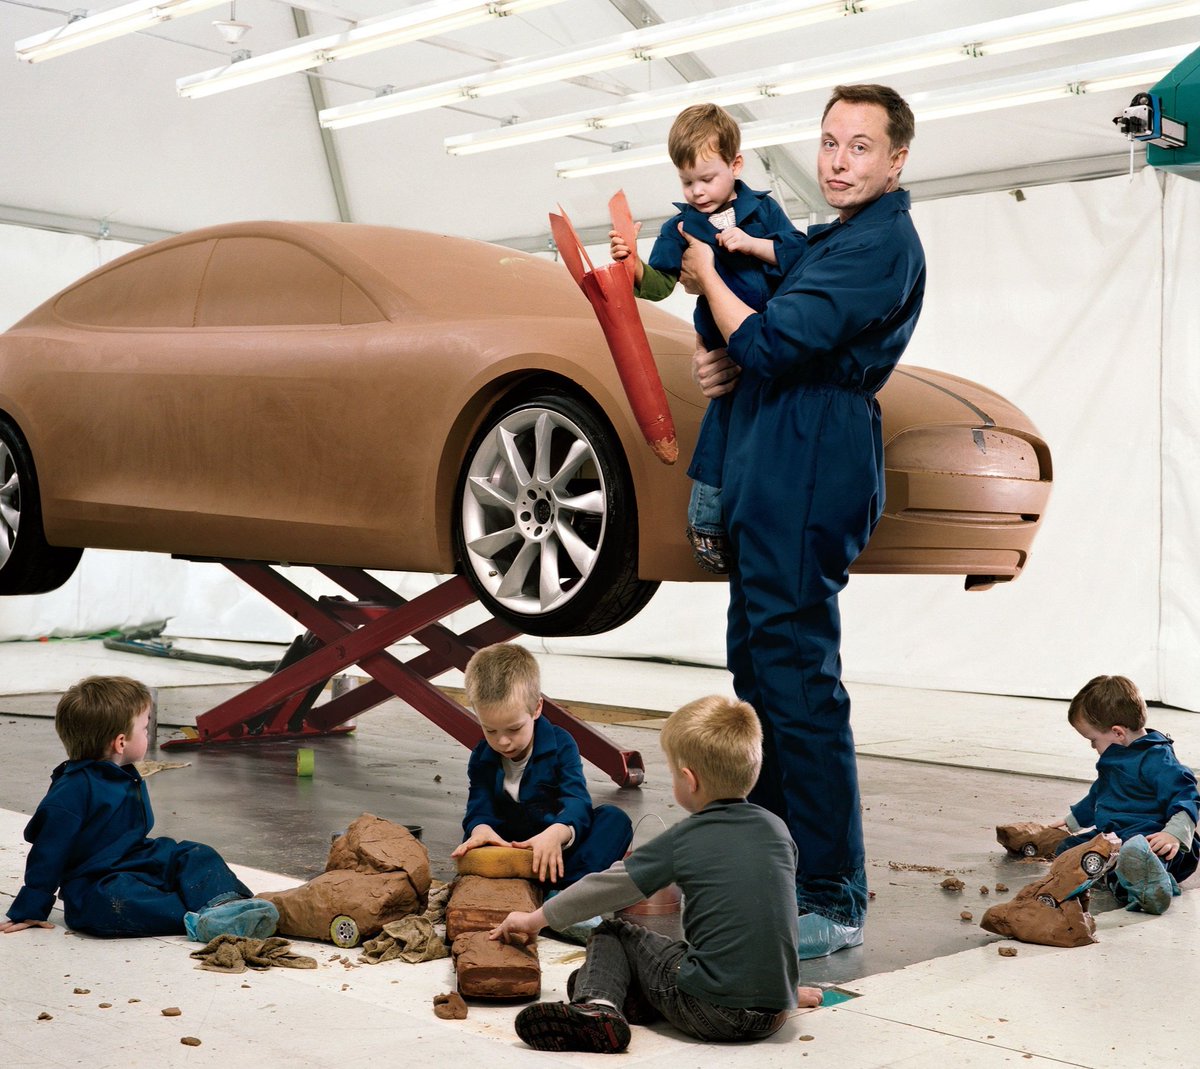 'Don’t forget to have kids. No kids, no future.' - @elonmusk